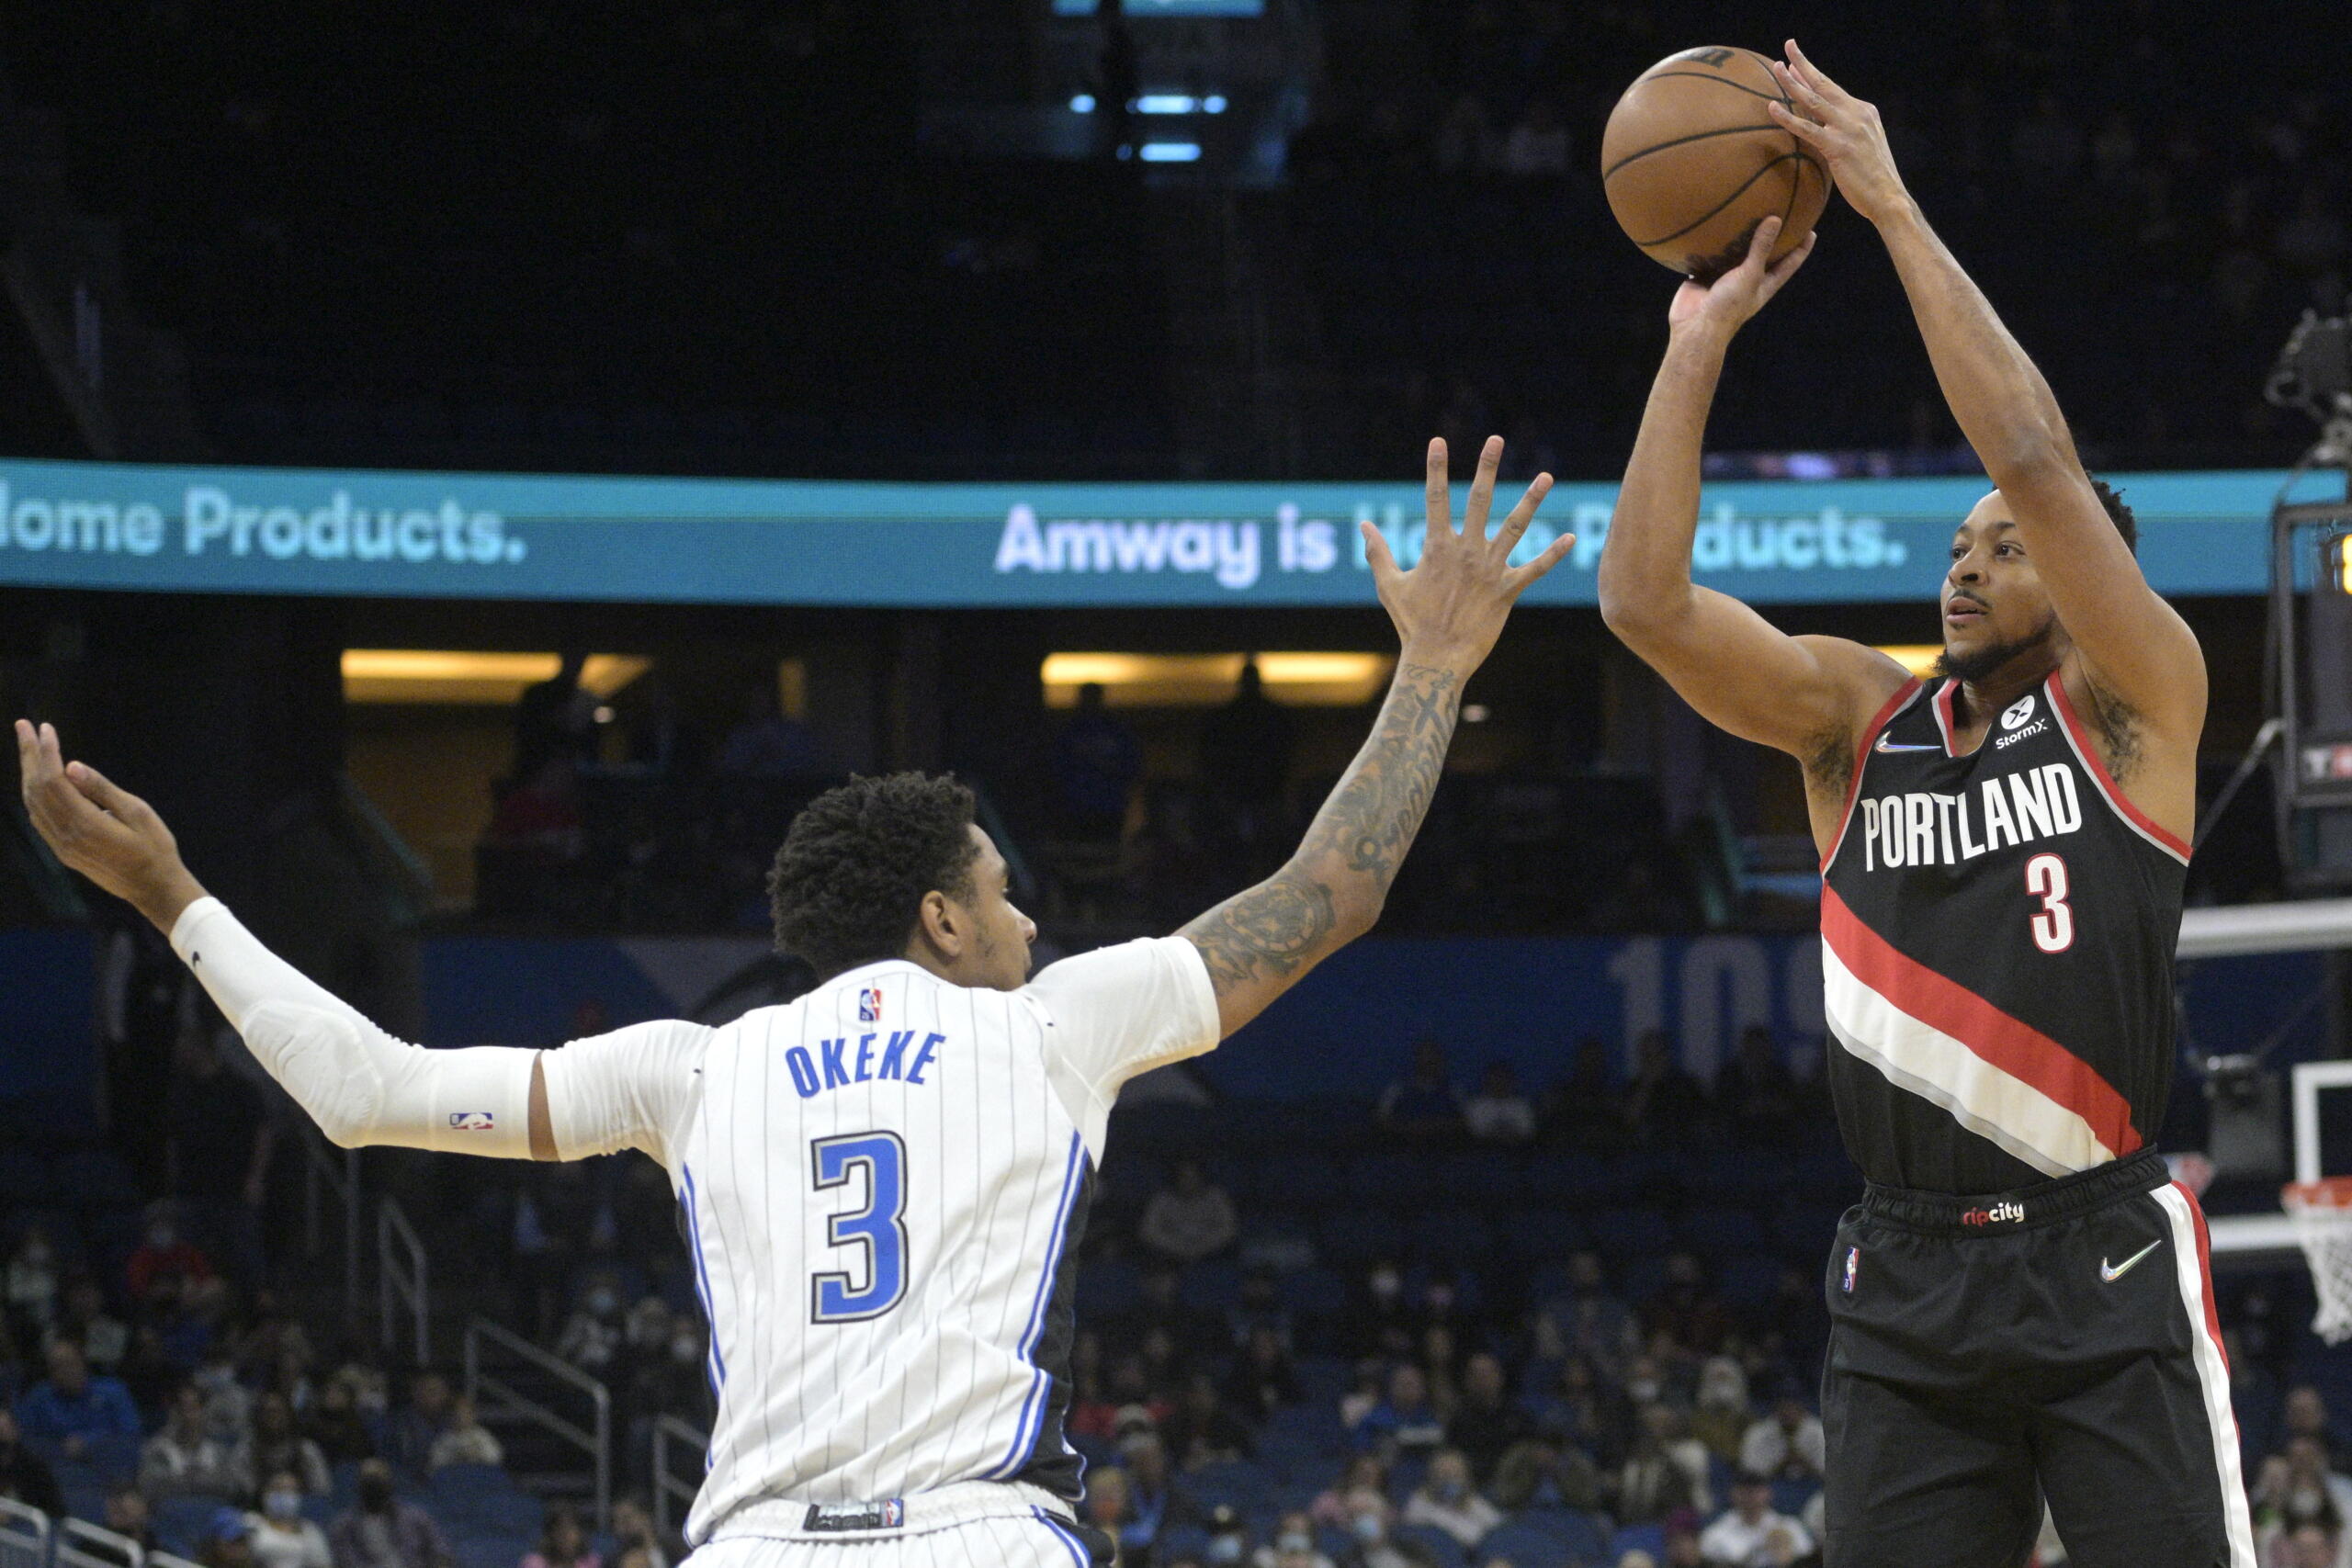 Portland Trail Blazers guard CJ McCollum, right, goes up for a three-point basket in front of Orlando Magic forward Chuma Okeke, left, during the first half of an NBA basketball game, Monday, Jan. 17, 2022, in Orlando, Fla. (AP Photo/Phelan M.